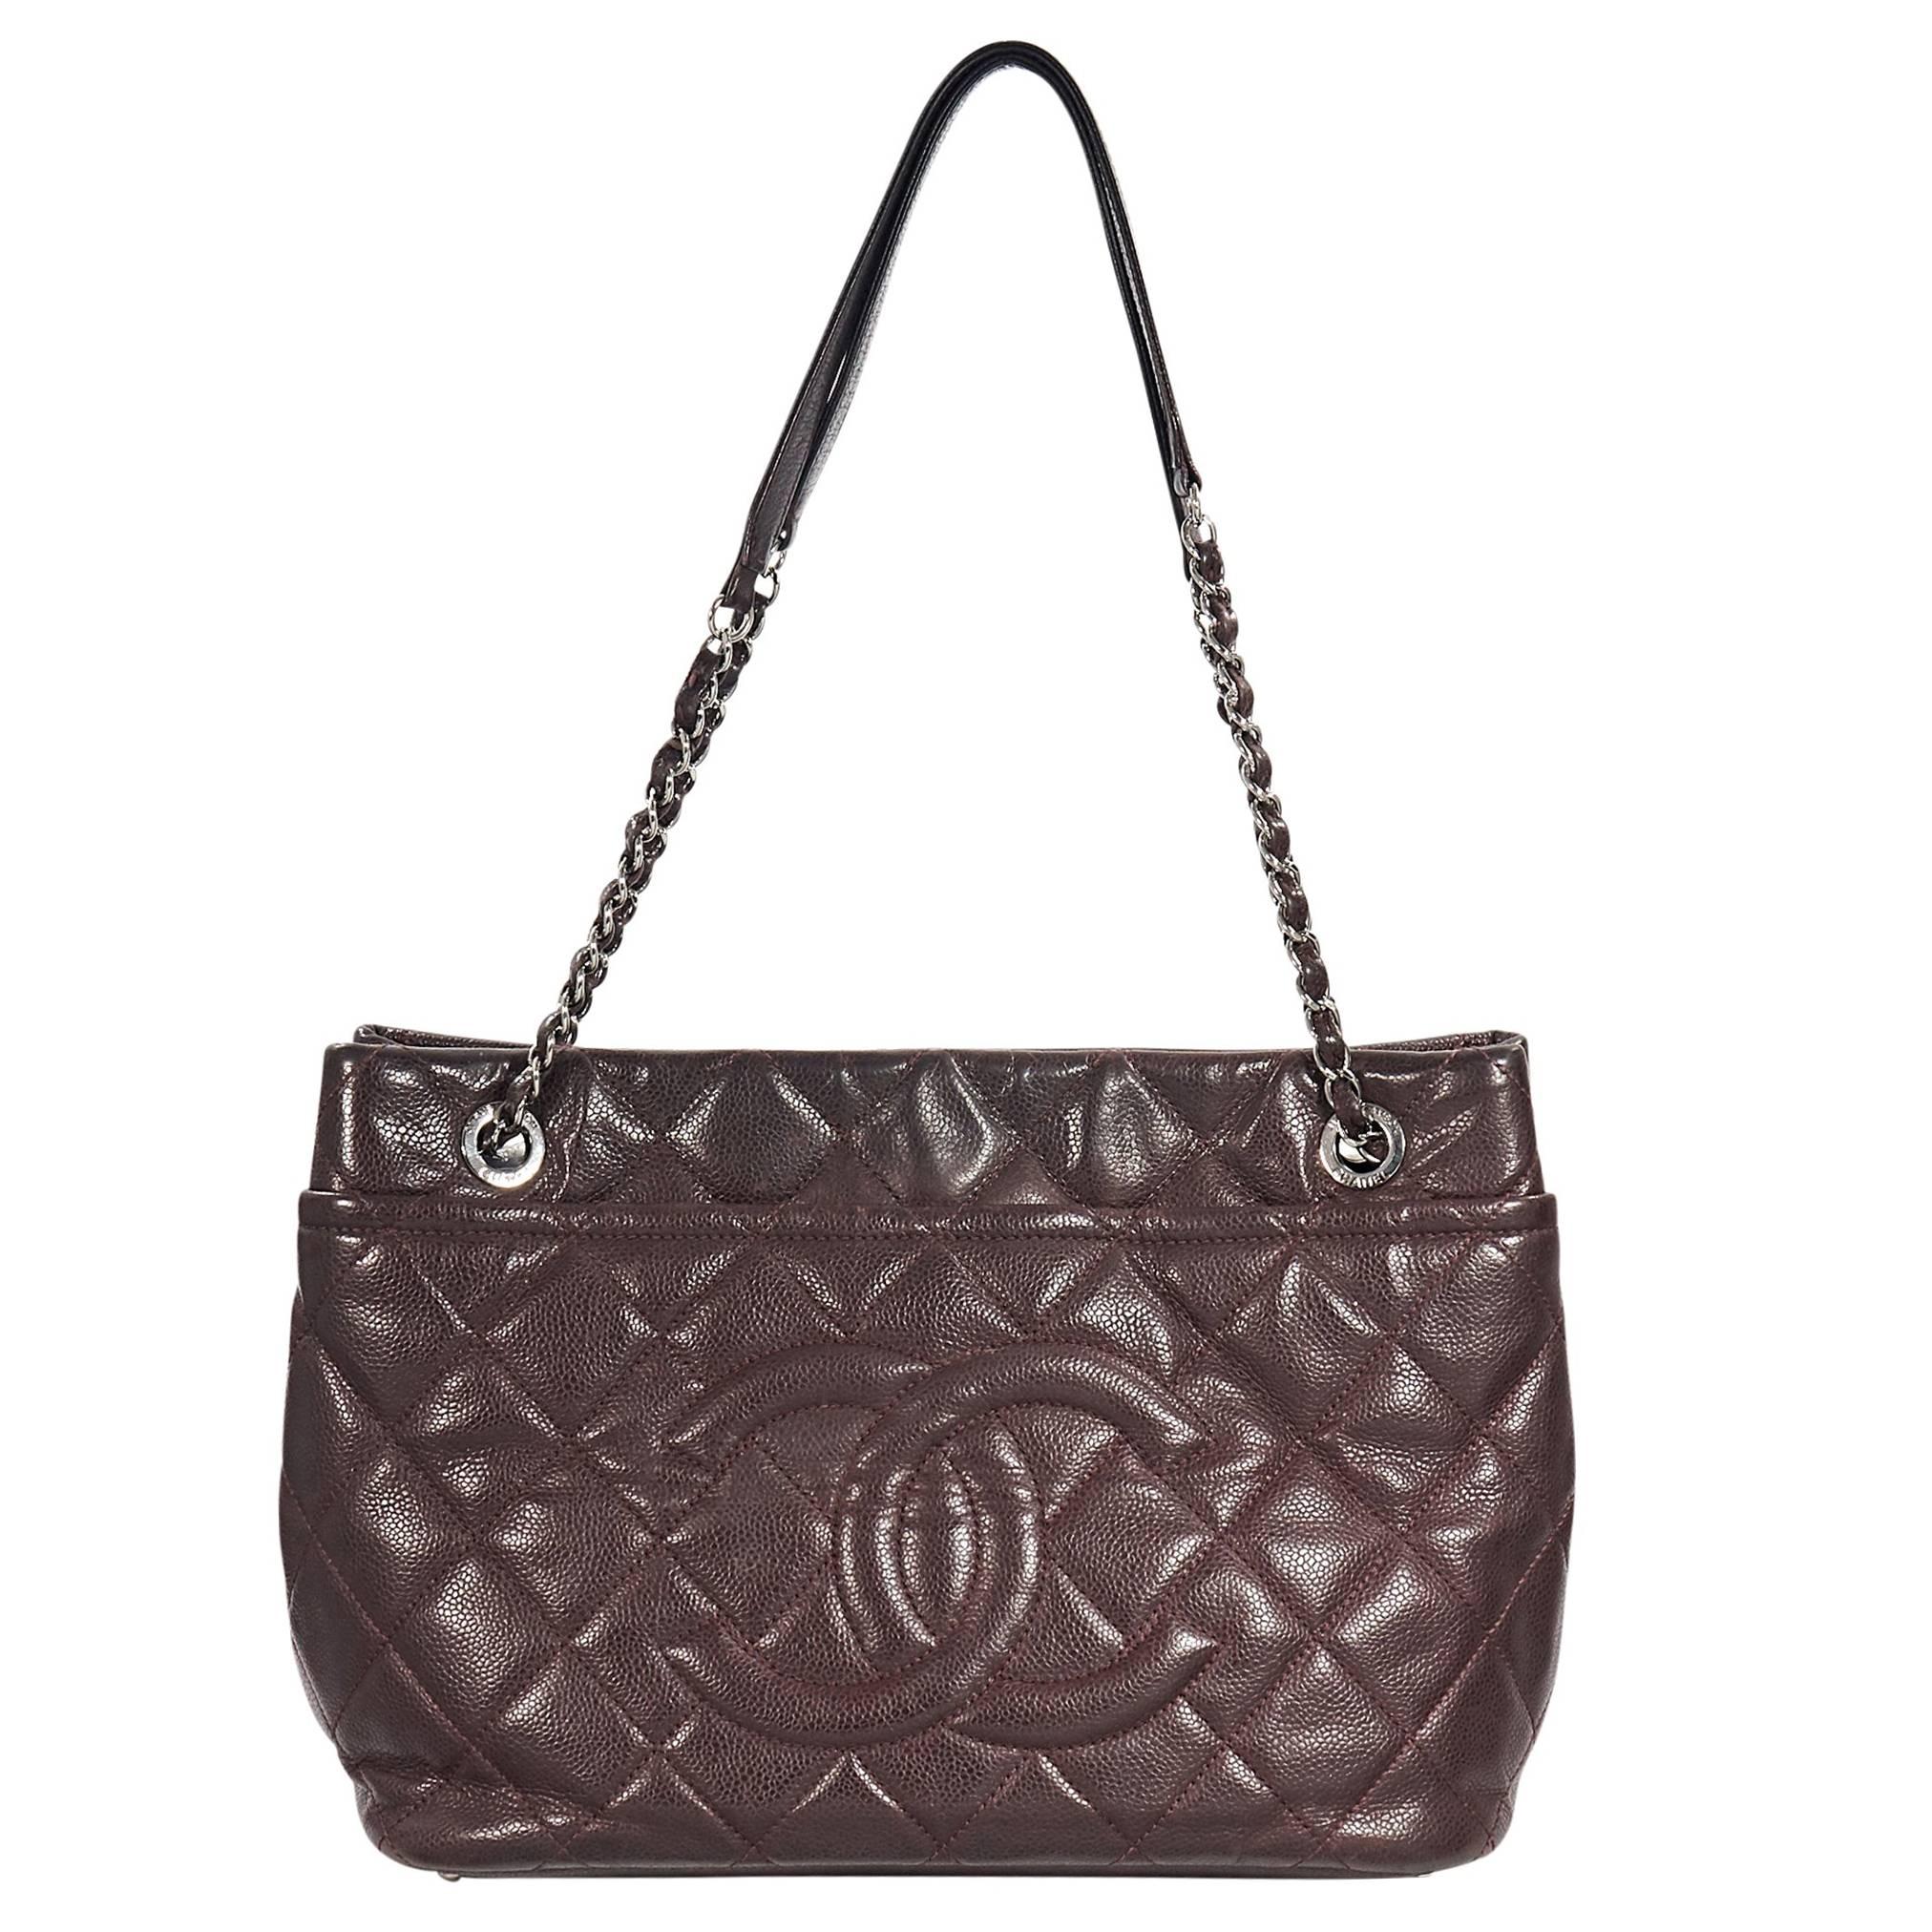 Burgundy Chanel Quilted Leather Tote Bag